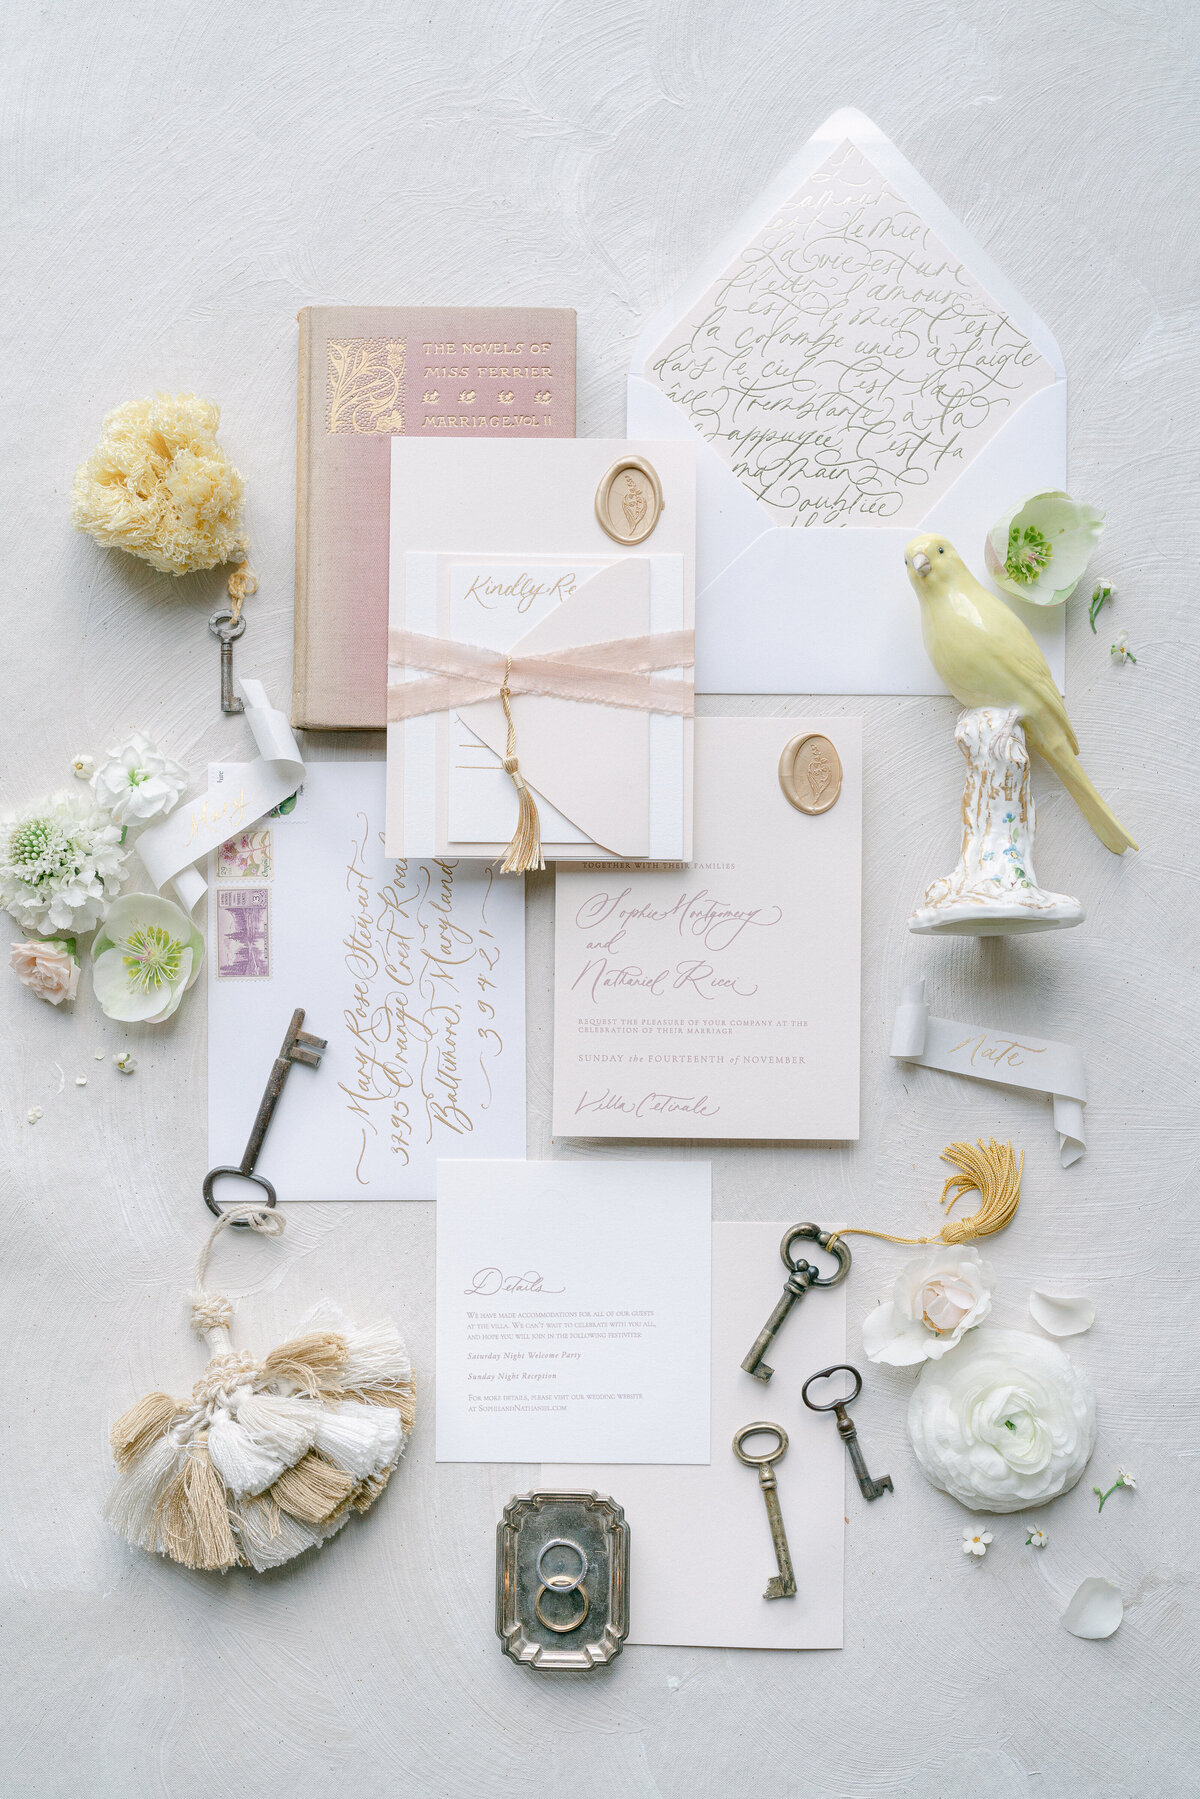 a wedding invitation suite with flowers and ribbons and old keys